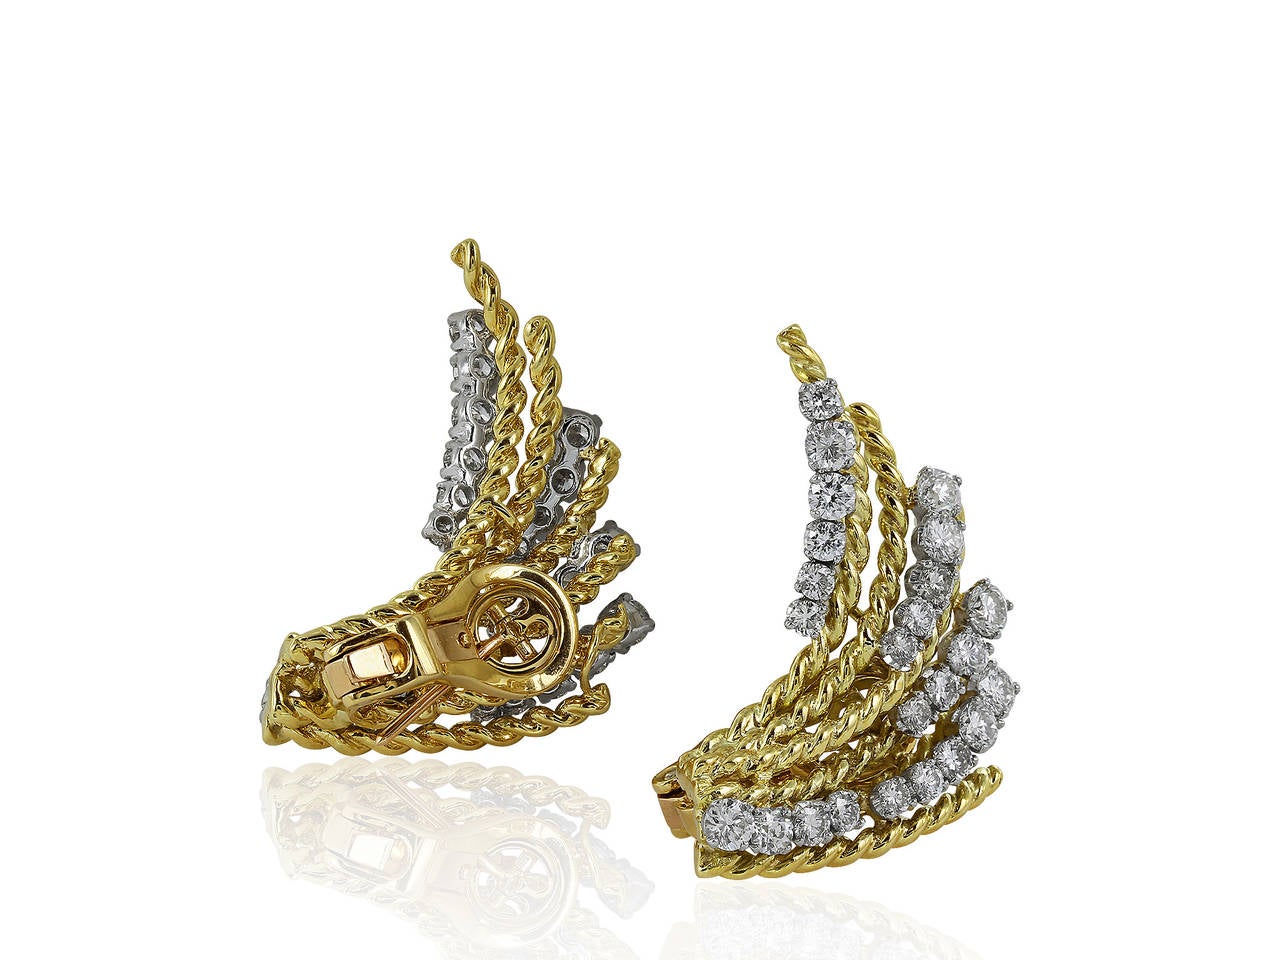 Two tone 18 karat yellow and white gold spray estate earring consisting of 48 round brilliant cut diamonds having a total weight of approximately 2.50 carats.